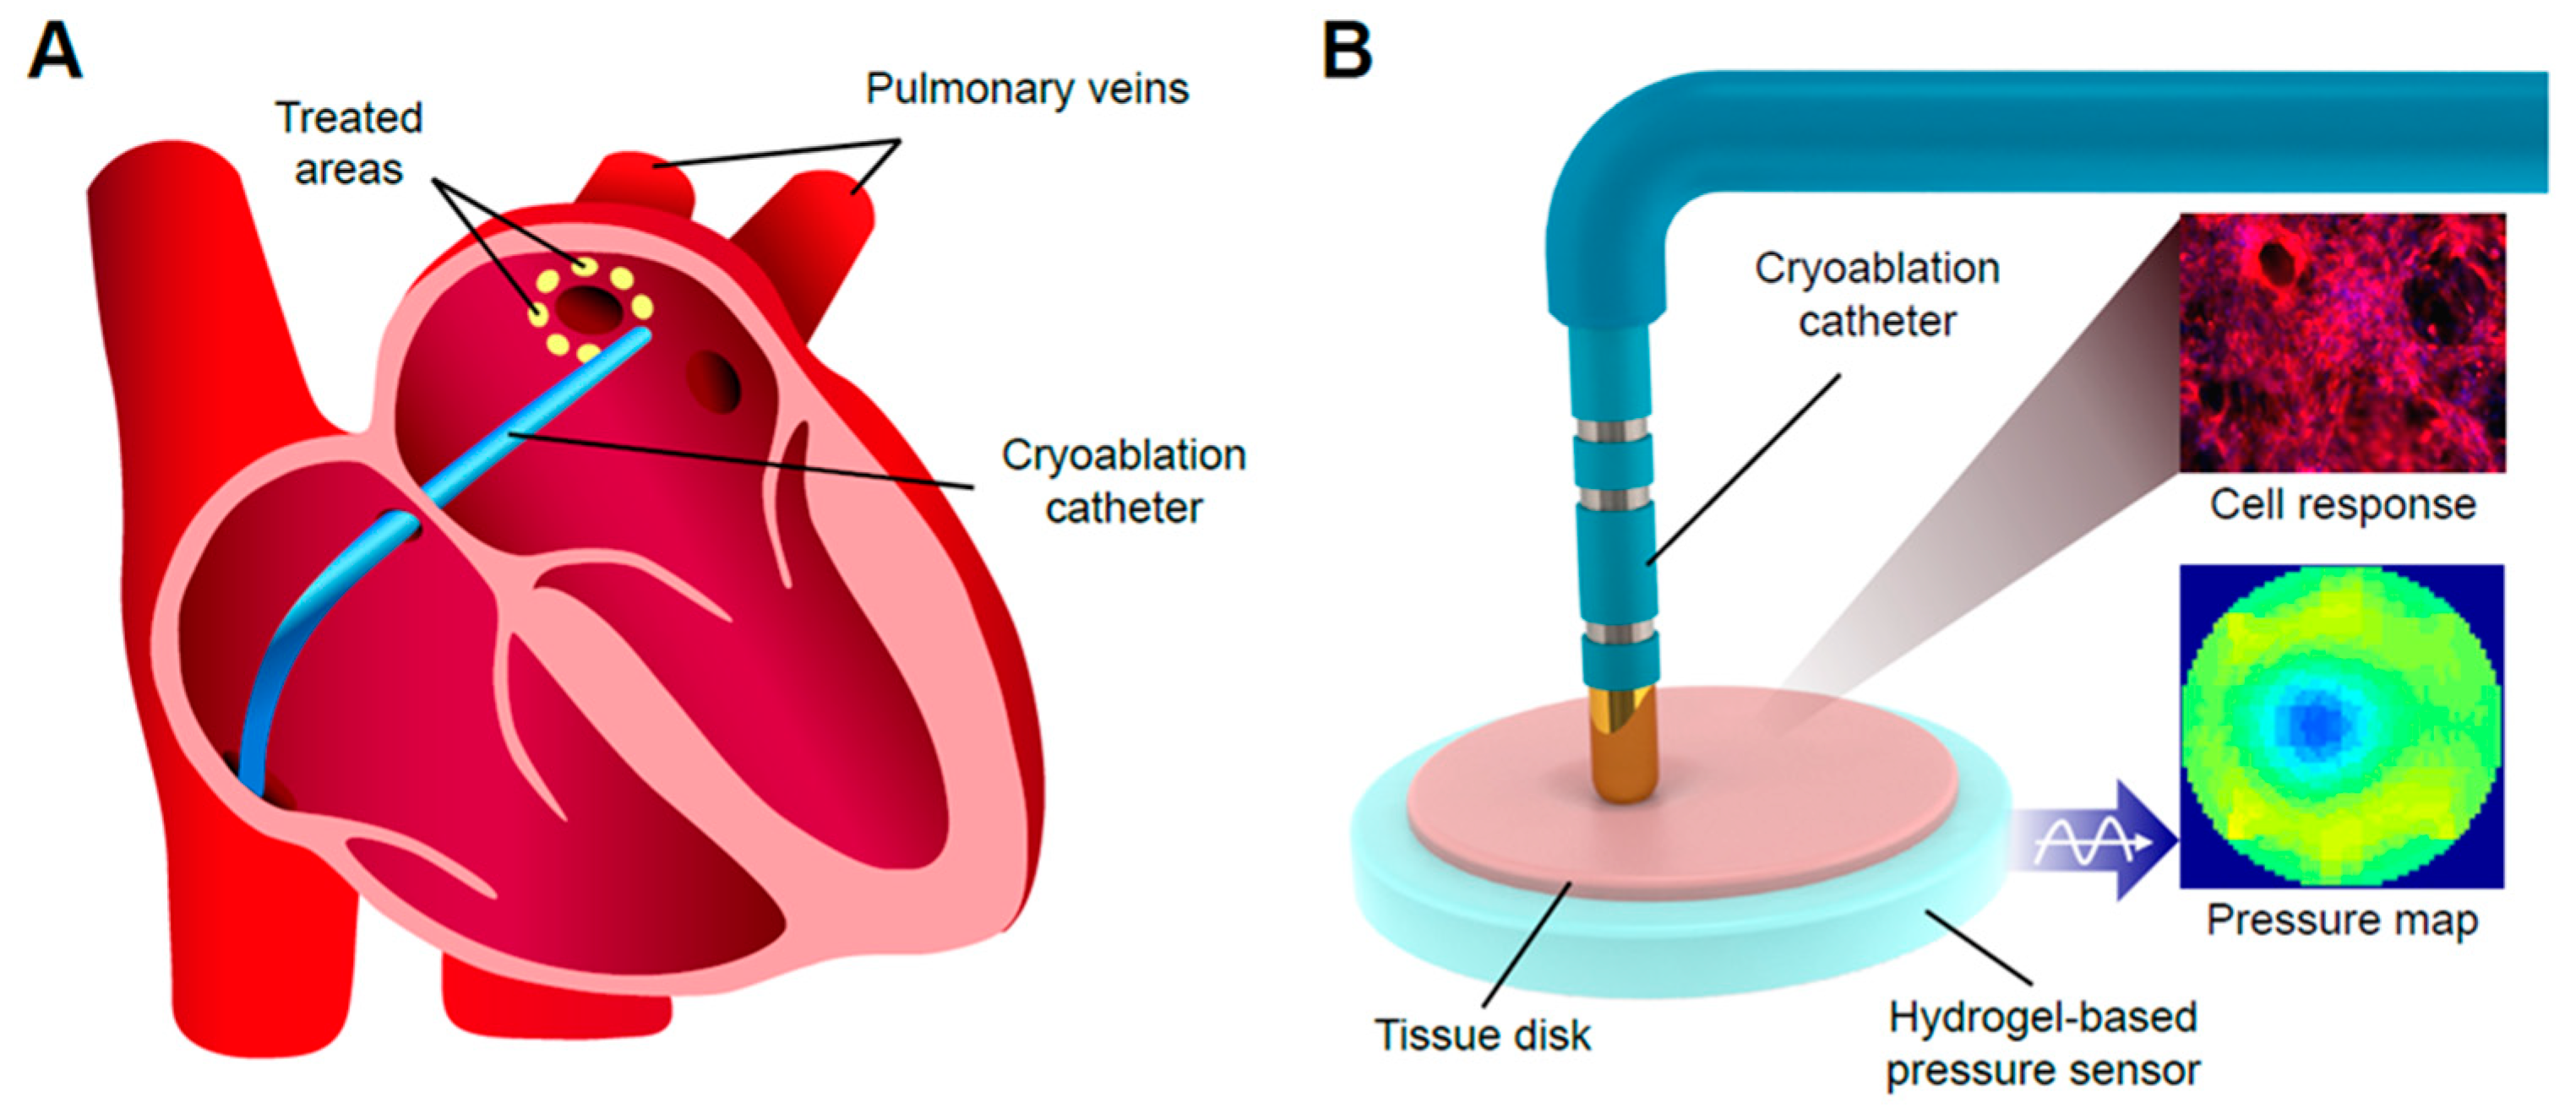 IJMS | Free Full-Text | A Bionic Testbed for Cardiac Ablation Tools